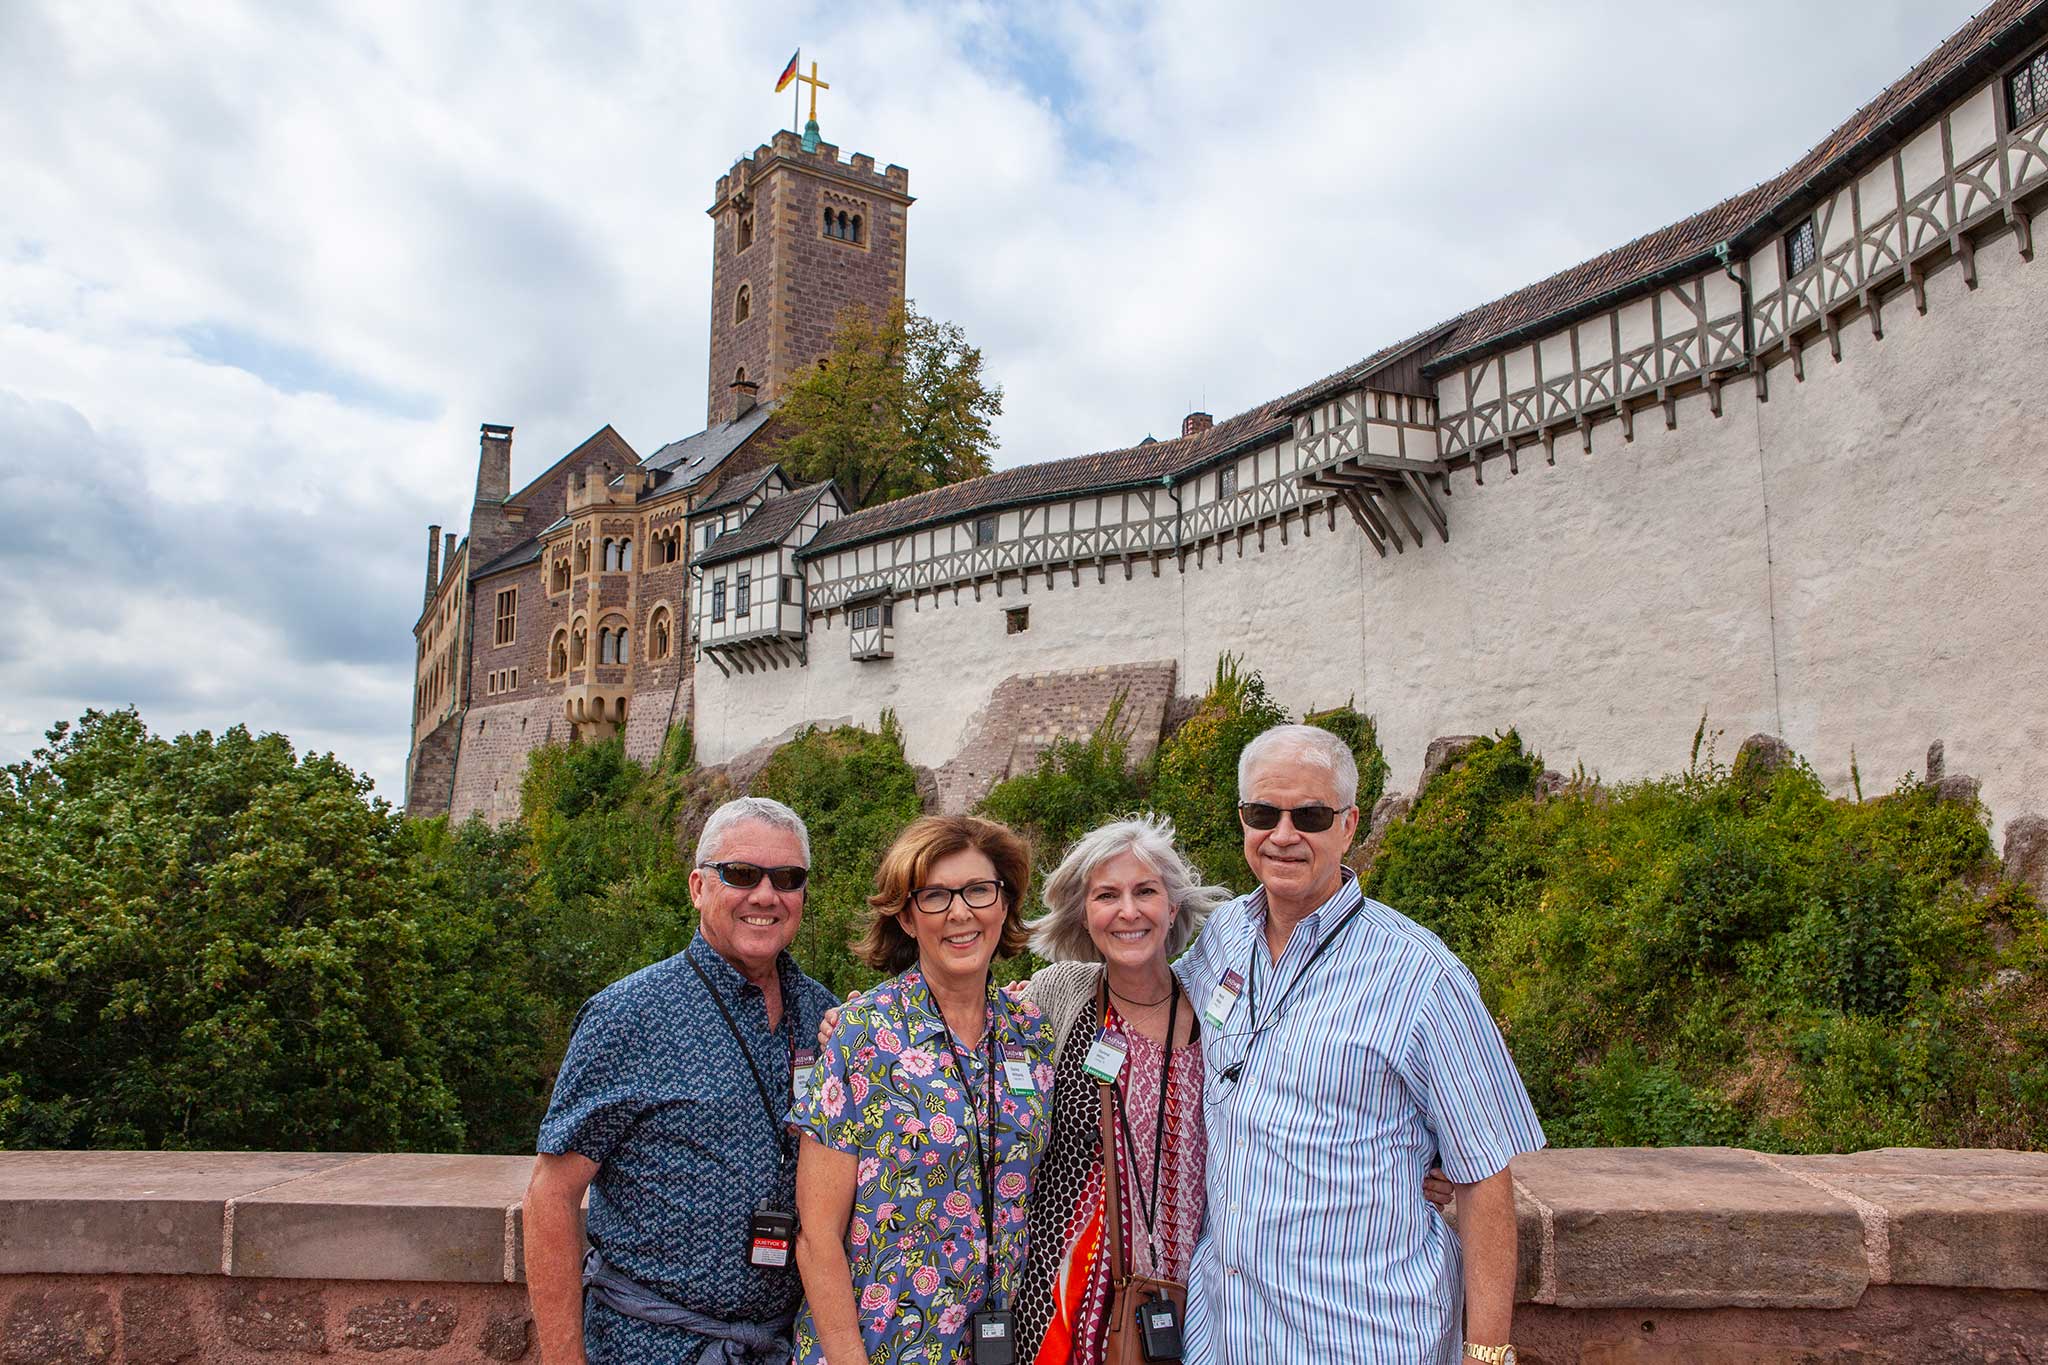 Two couples in different bright patterned shirts smile for the camera in front of green shrubbery and a brown brick castle towering in the background.